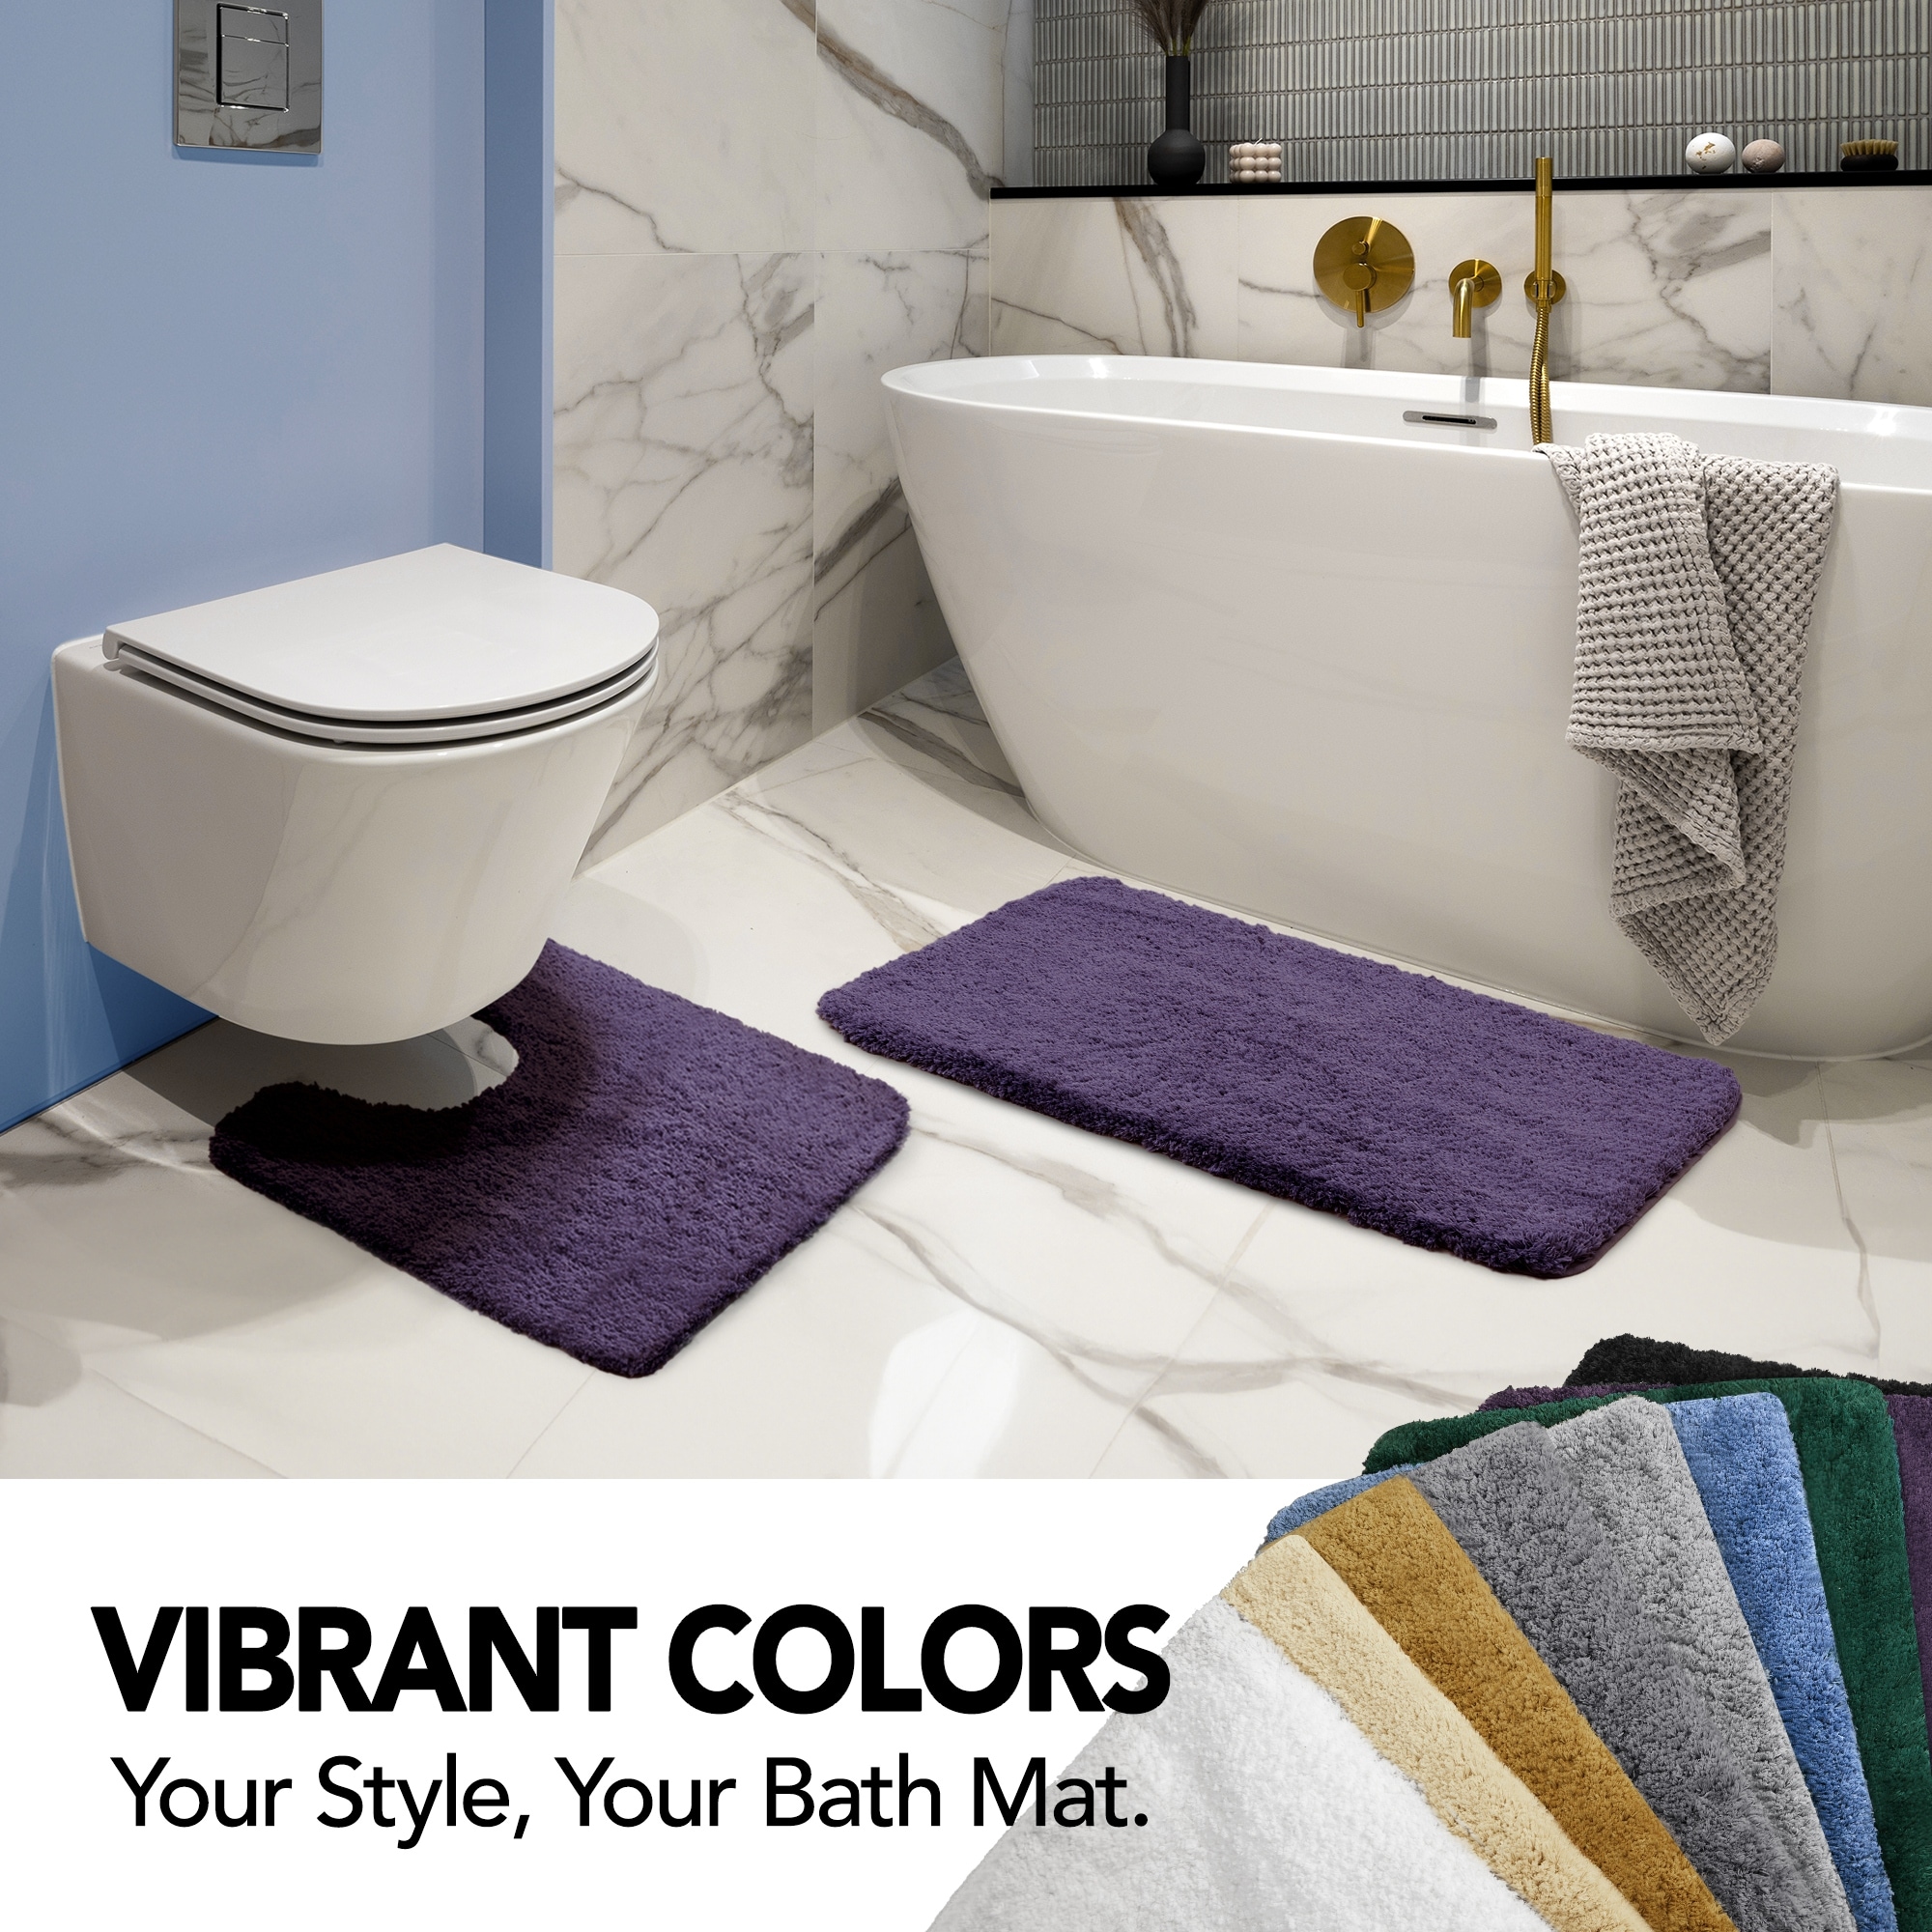 Bath Mats - Highly Absorbent Bathroom Mats in Vibrant Colours